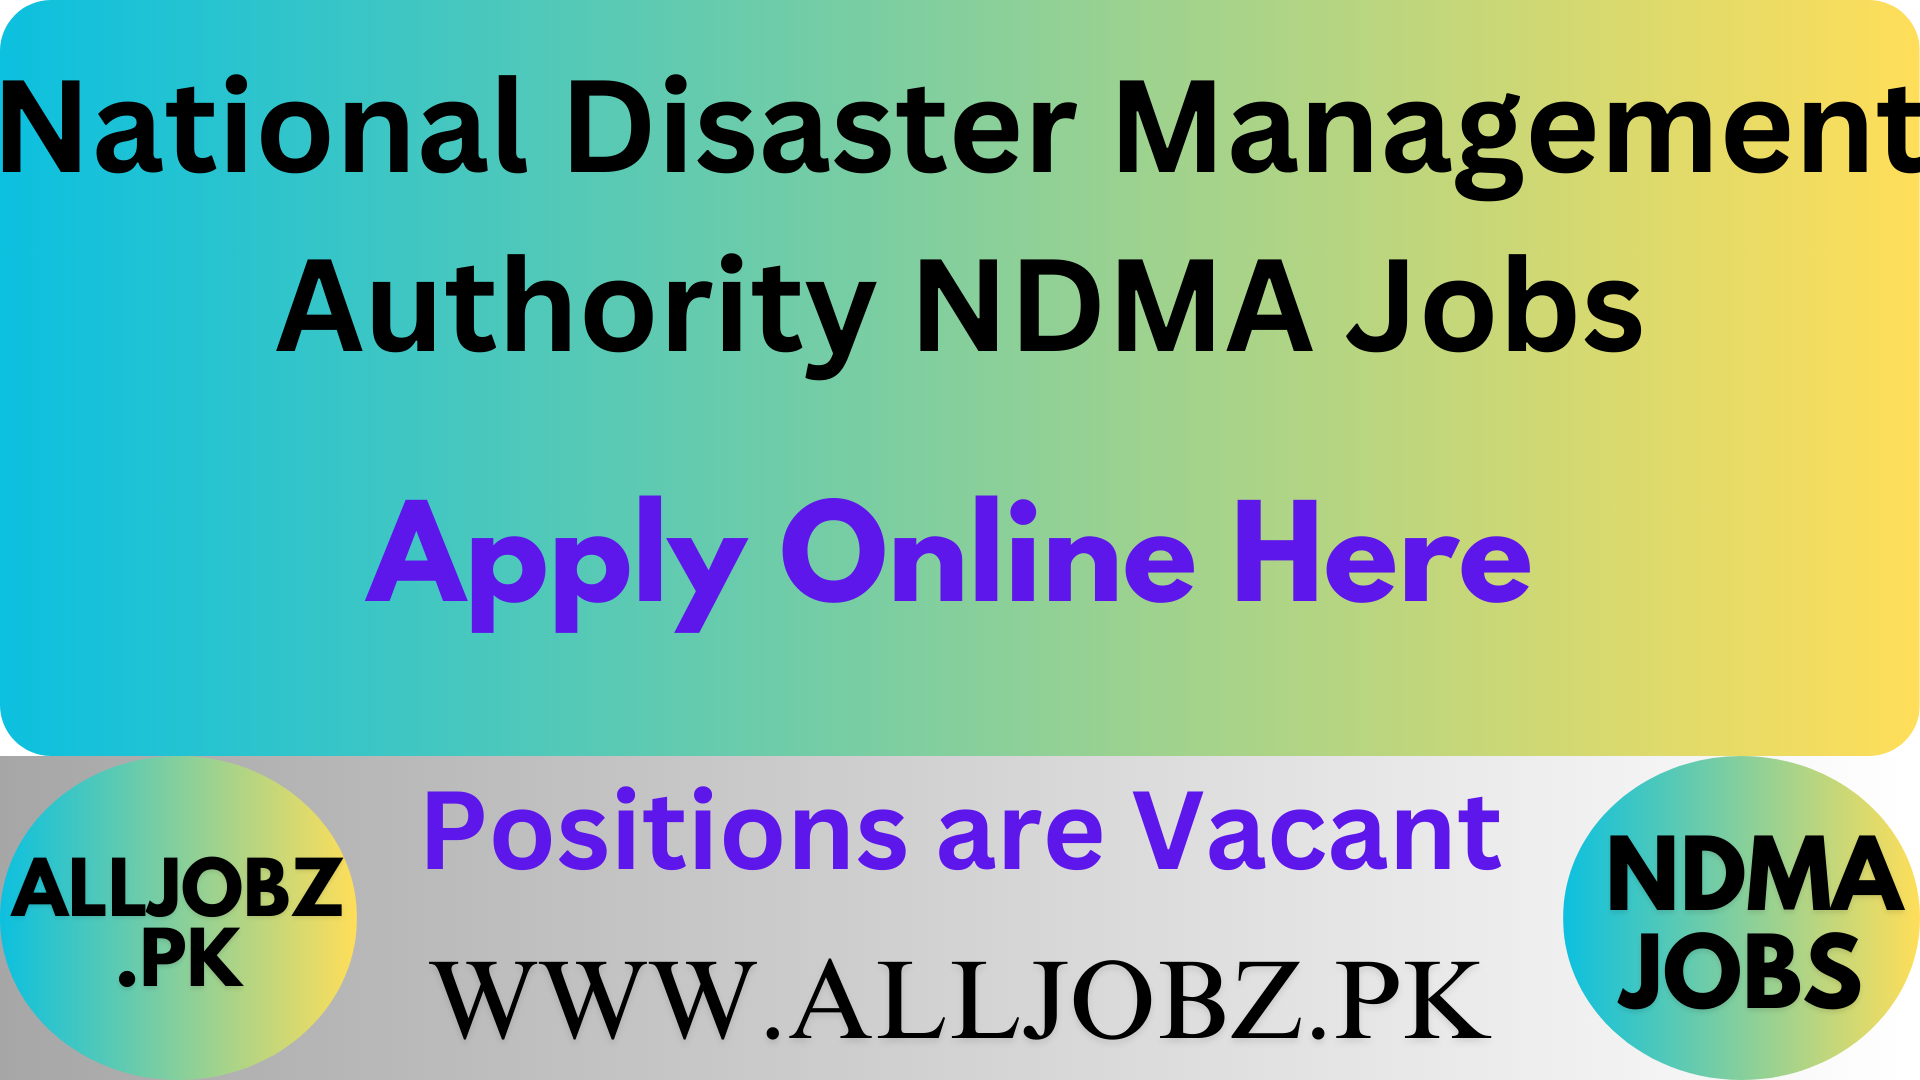 National Disaster Management Authority Ndma Jobs Apply Online, Ndma Jobs, National Disaster Management Authority Vacancies, Deputy Manager Production Job, Assistant Manager Videography Job, Assistant Manager Photography Job, Ndma Career Opportunities, Government Jobs In Pakistan, Project-Based Jobs, Islamabad Job Vacancies,